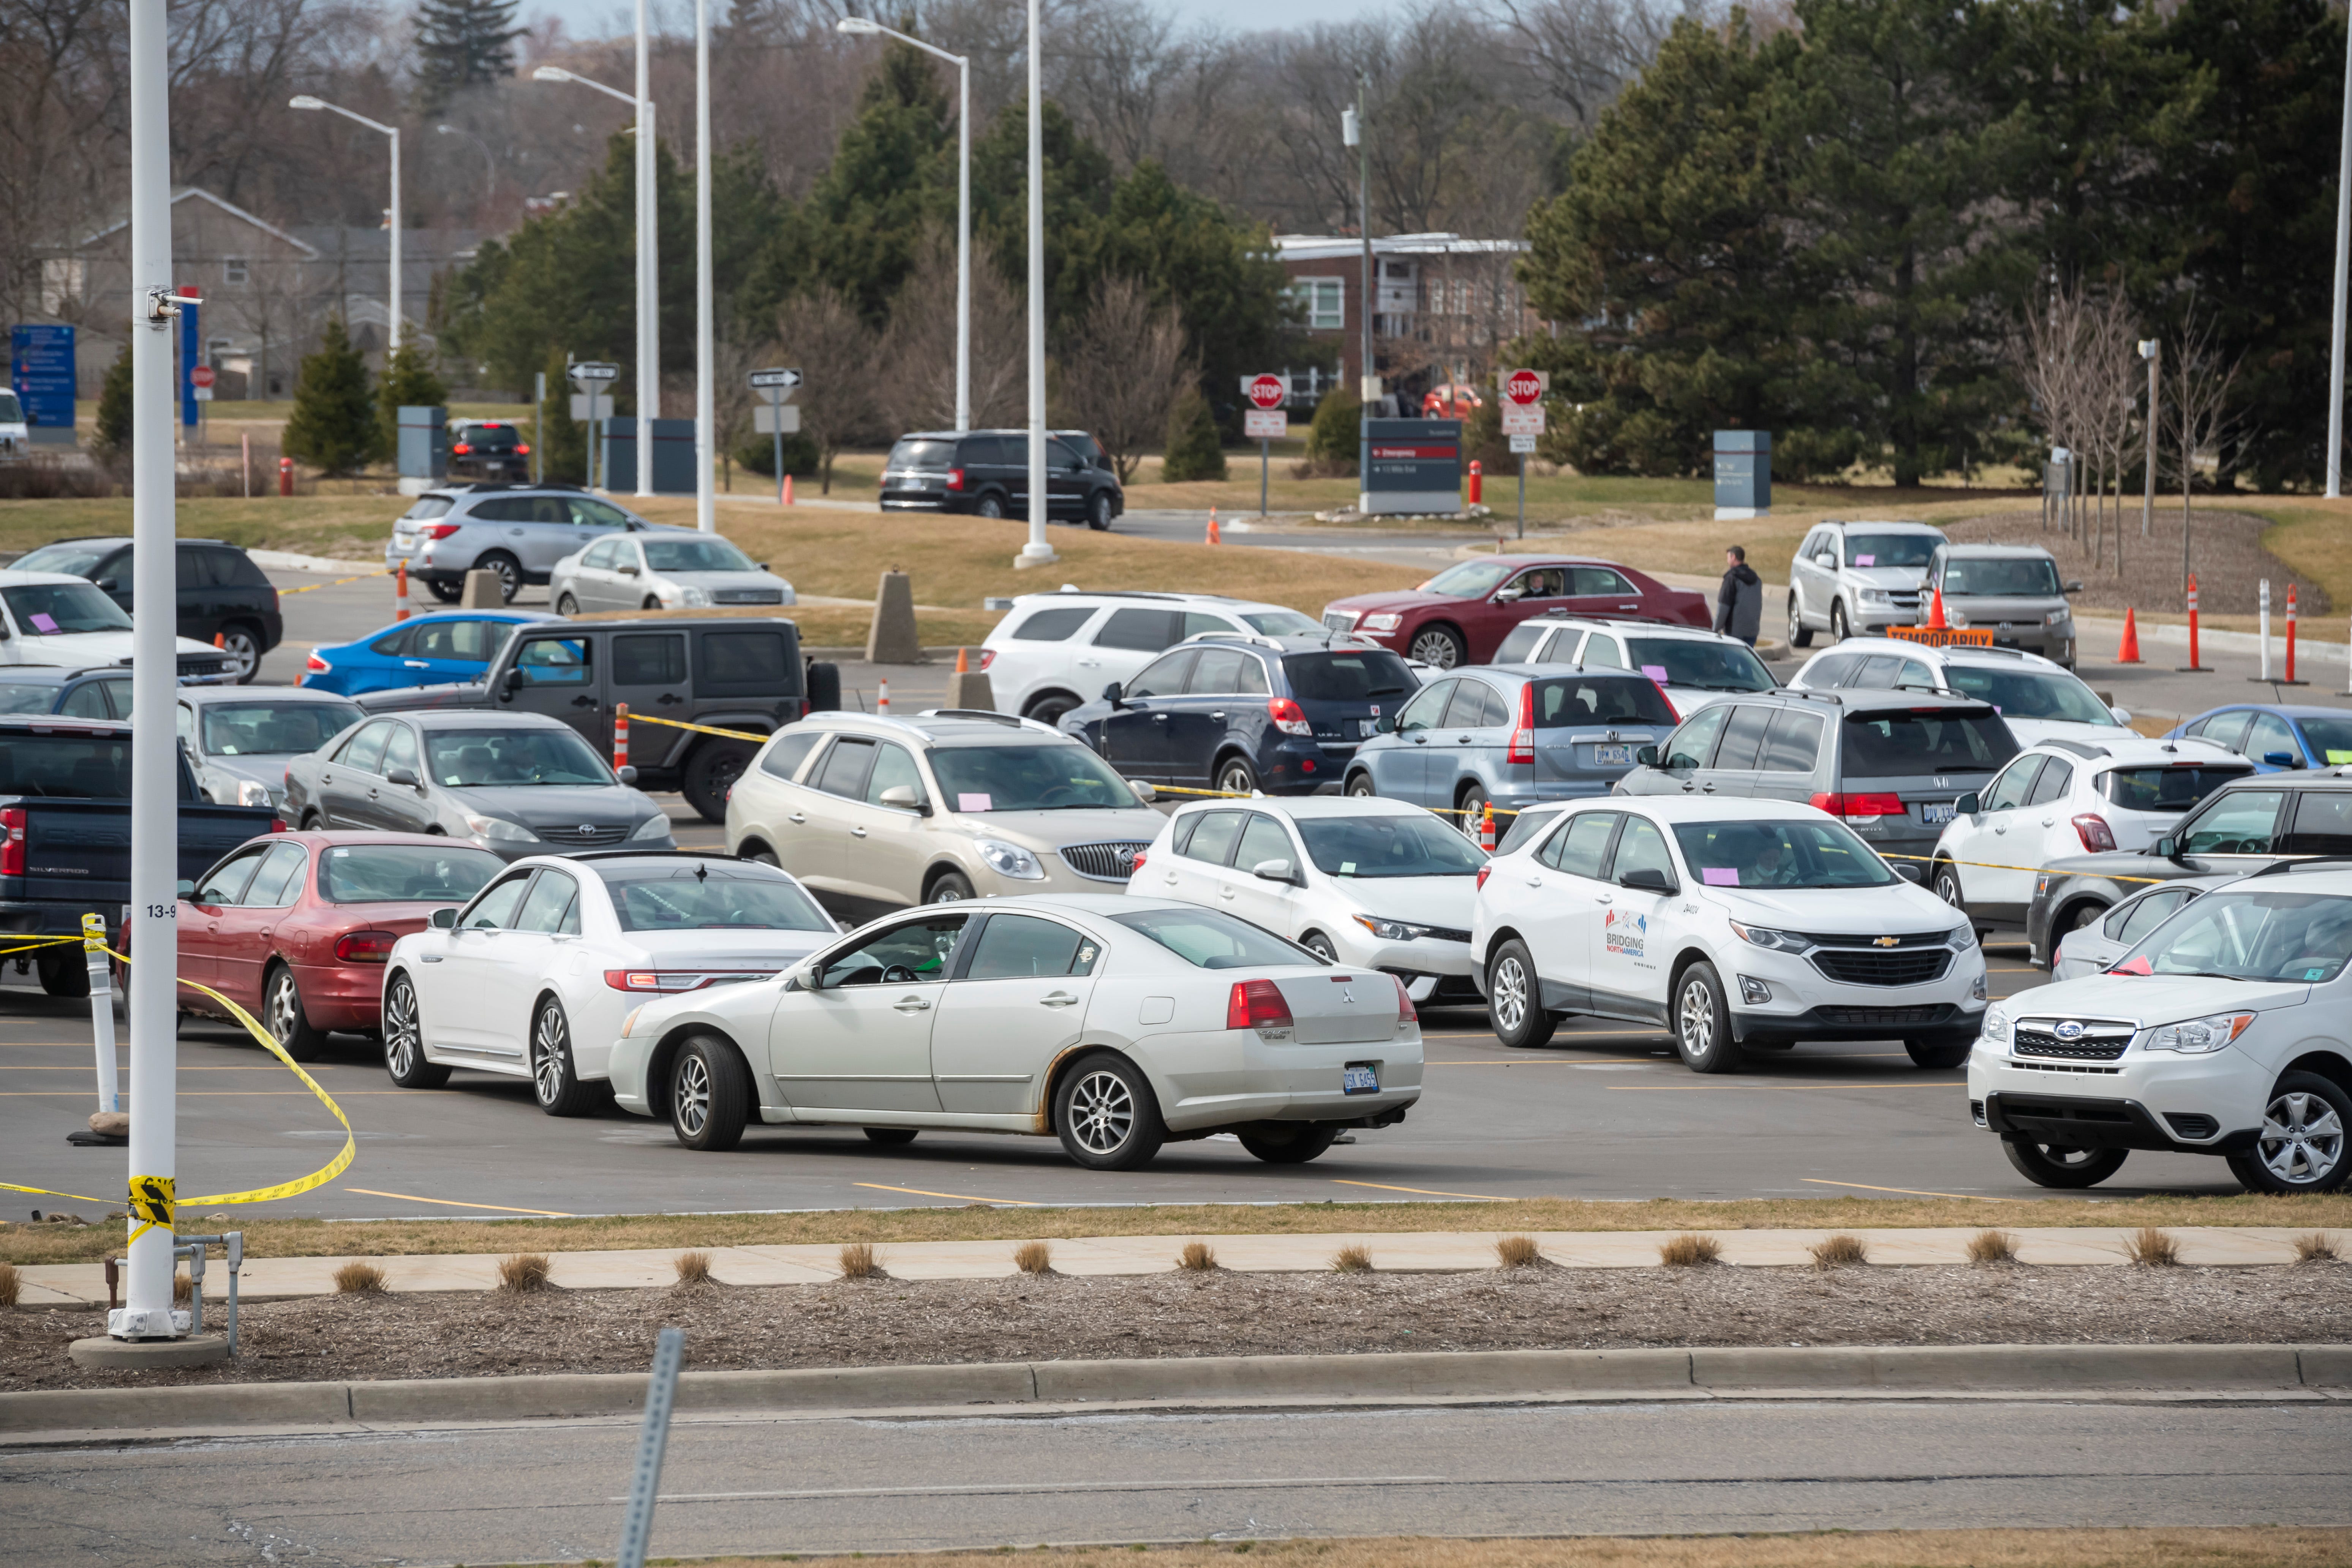 Dozens of cars wait in line to be seen by medical staff during a drive-up screening process at Beaumont hospital in Royal Oak, March 16, 2020. Members of the public concerned that they may be infected with the coronavirus were able to get screening done from their vehicles.